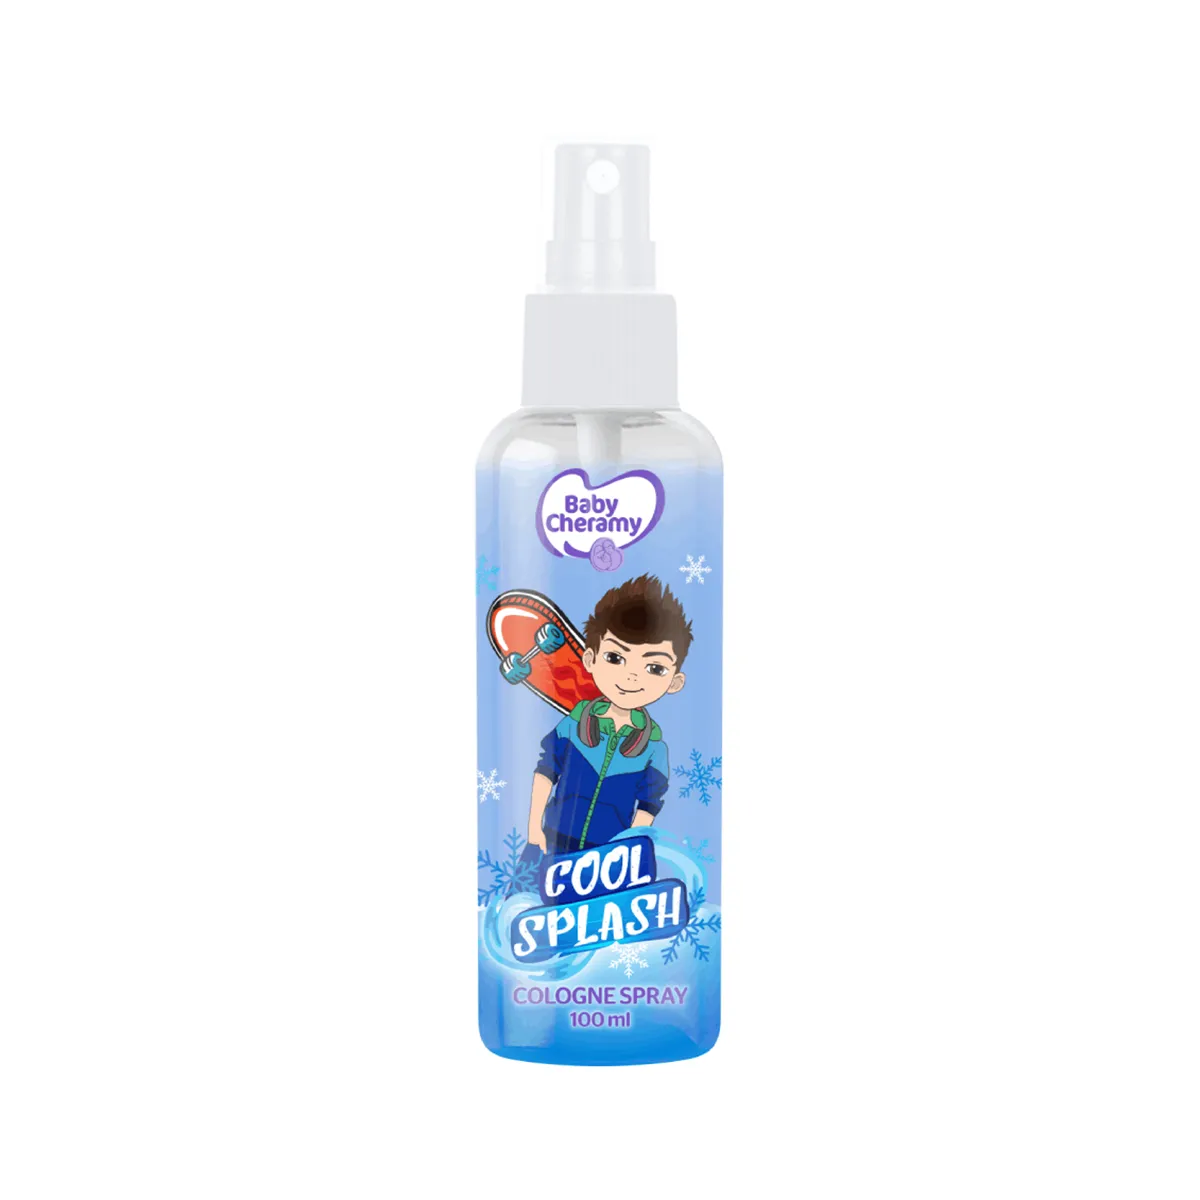 First product image of Baby Cheramy Tweens Cologne Cool Splash 100ml